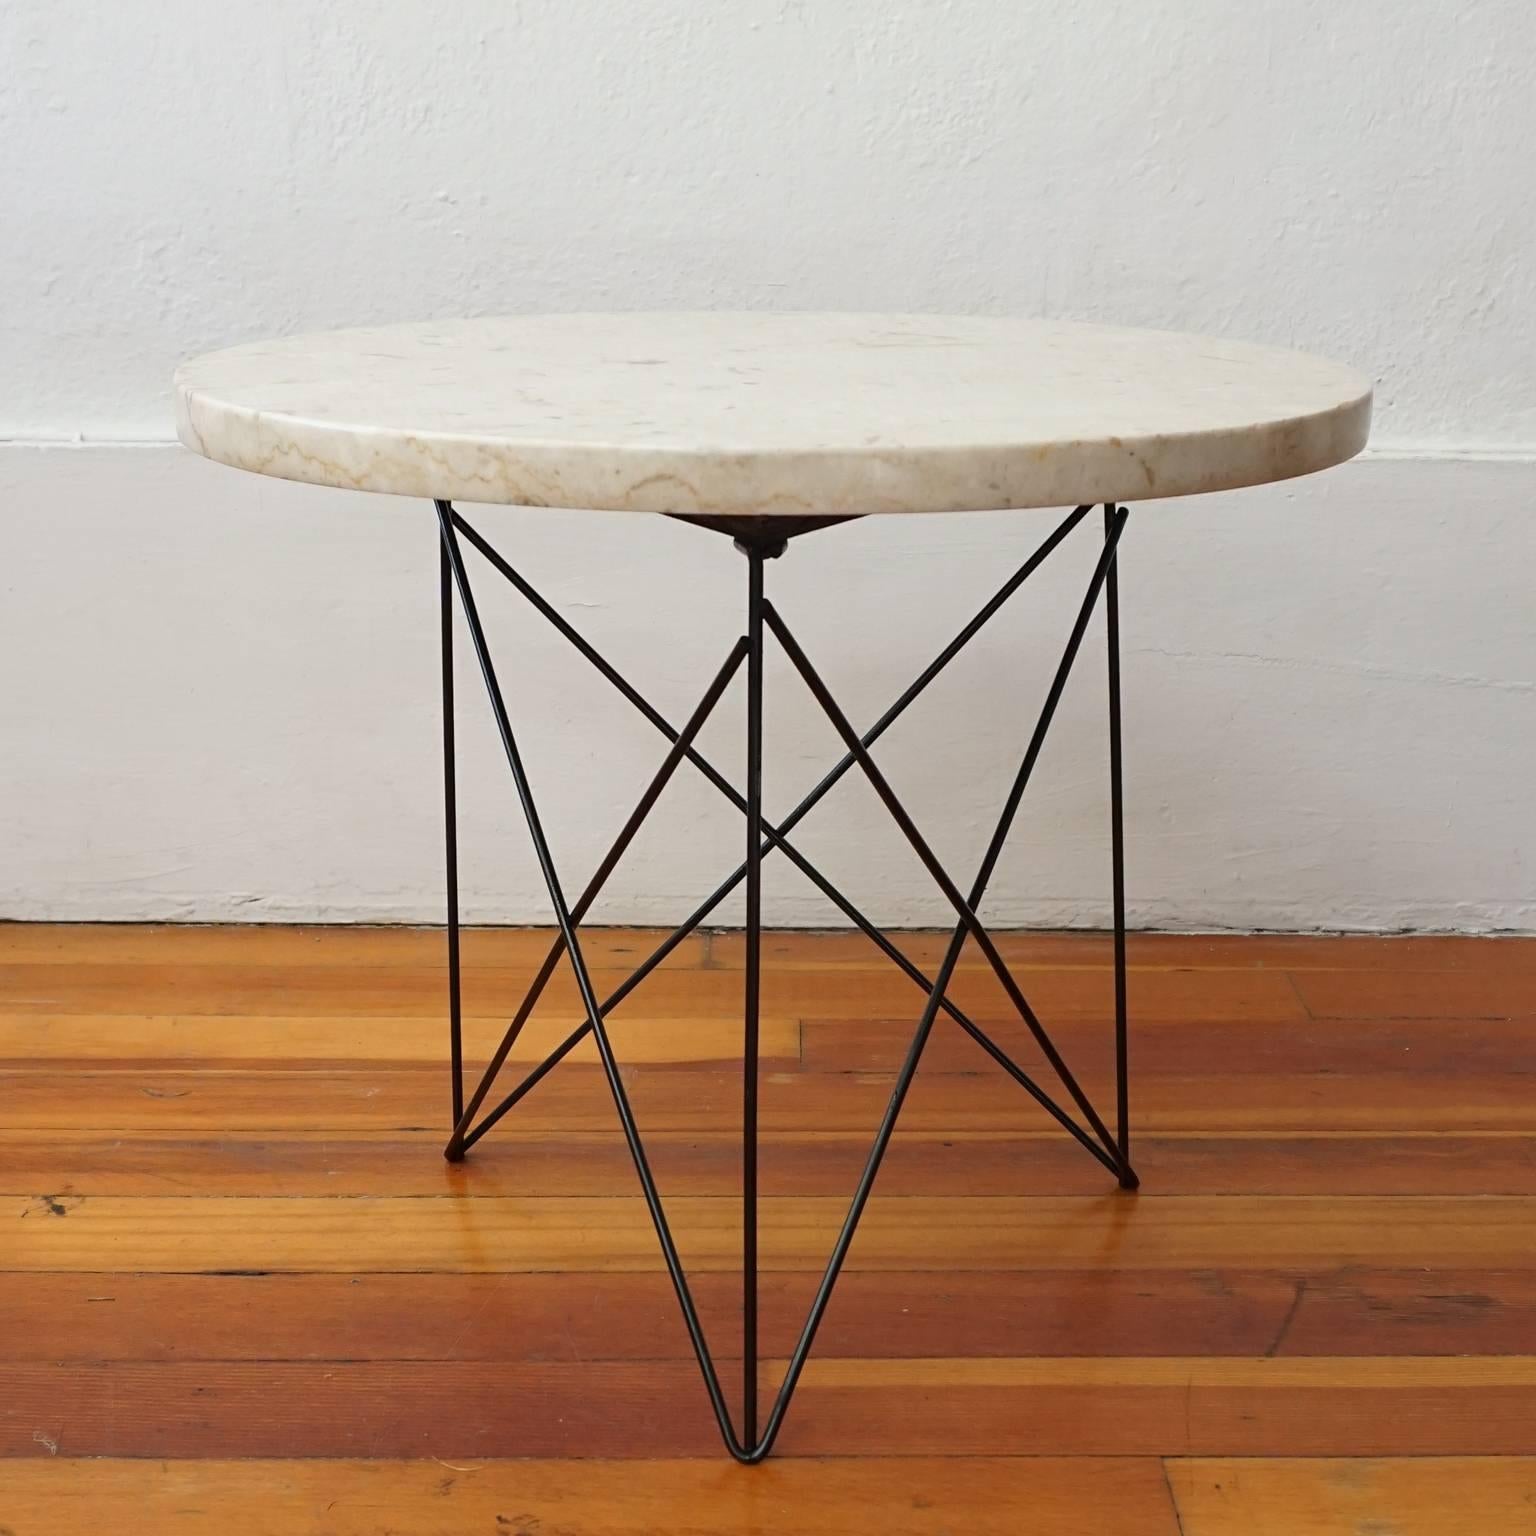 Criss-cross tripod base with marble top side table by Martin Perfit for Rene Brancusi Inc, 1950s.